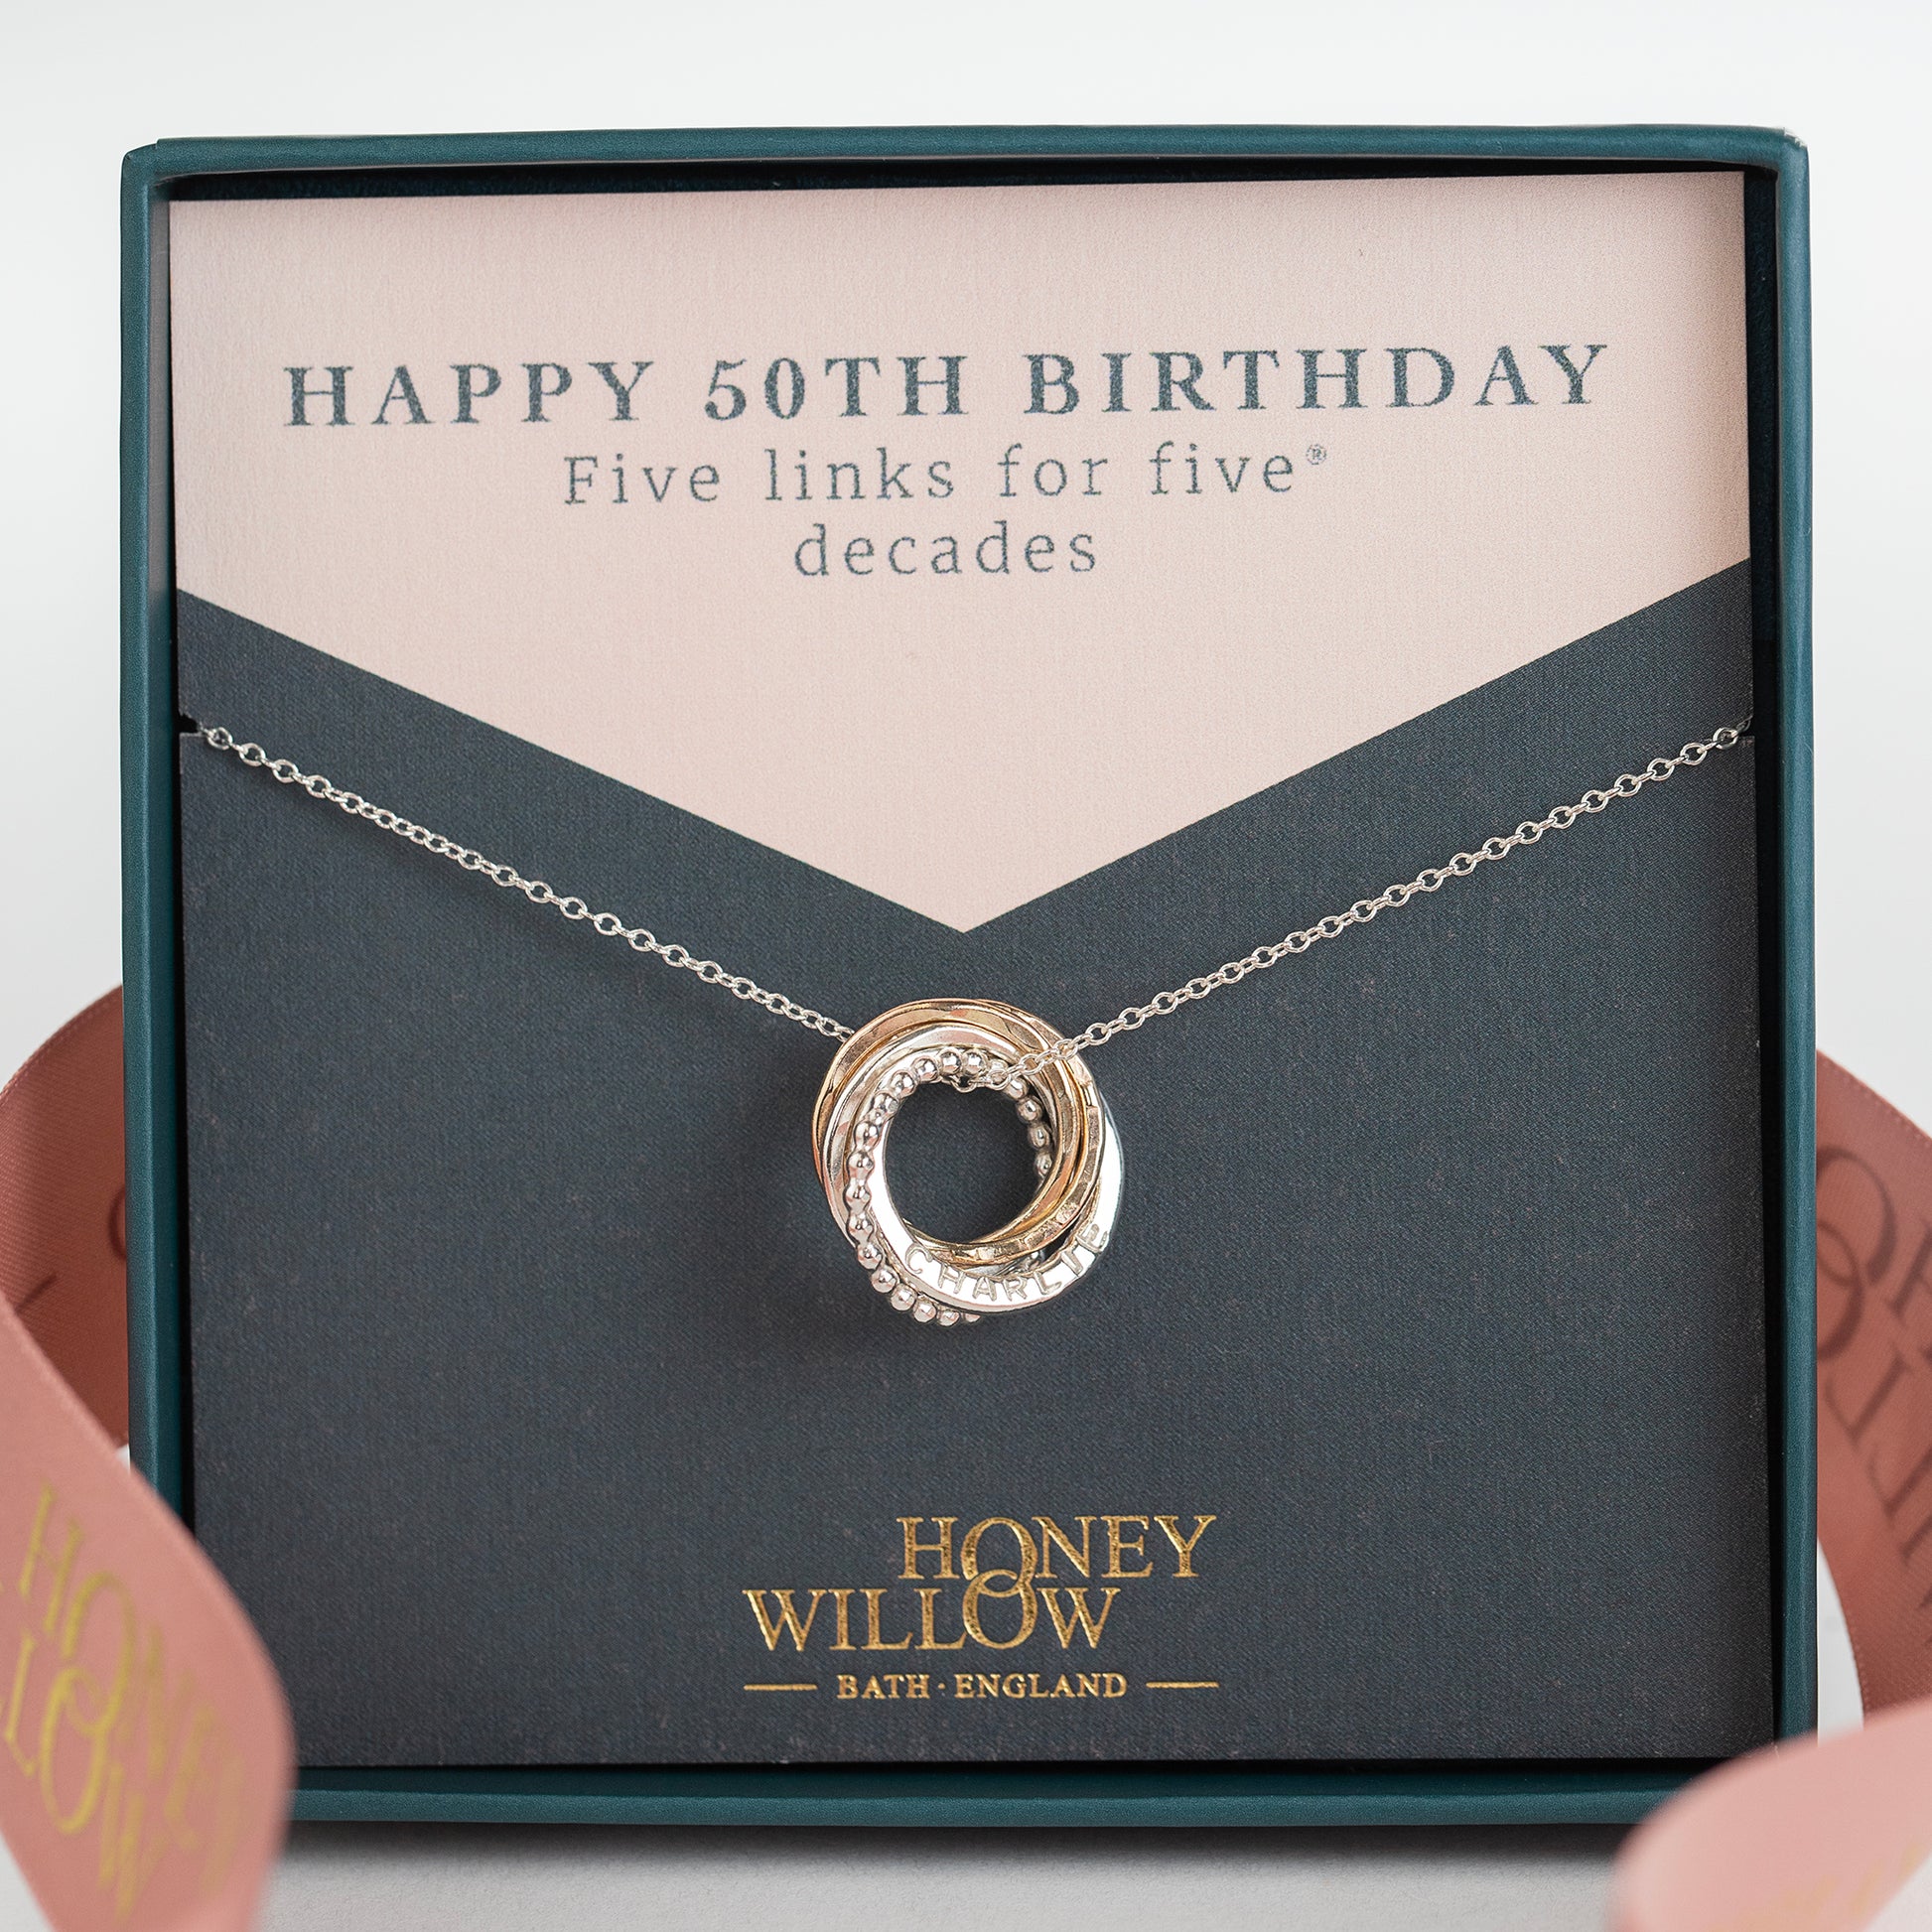 Personalised 50th Birthday Necklace - The Original 5 Links for 5 Decades Necklace - Petite Silver & Gold